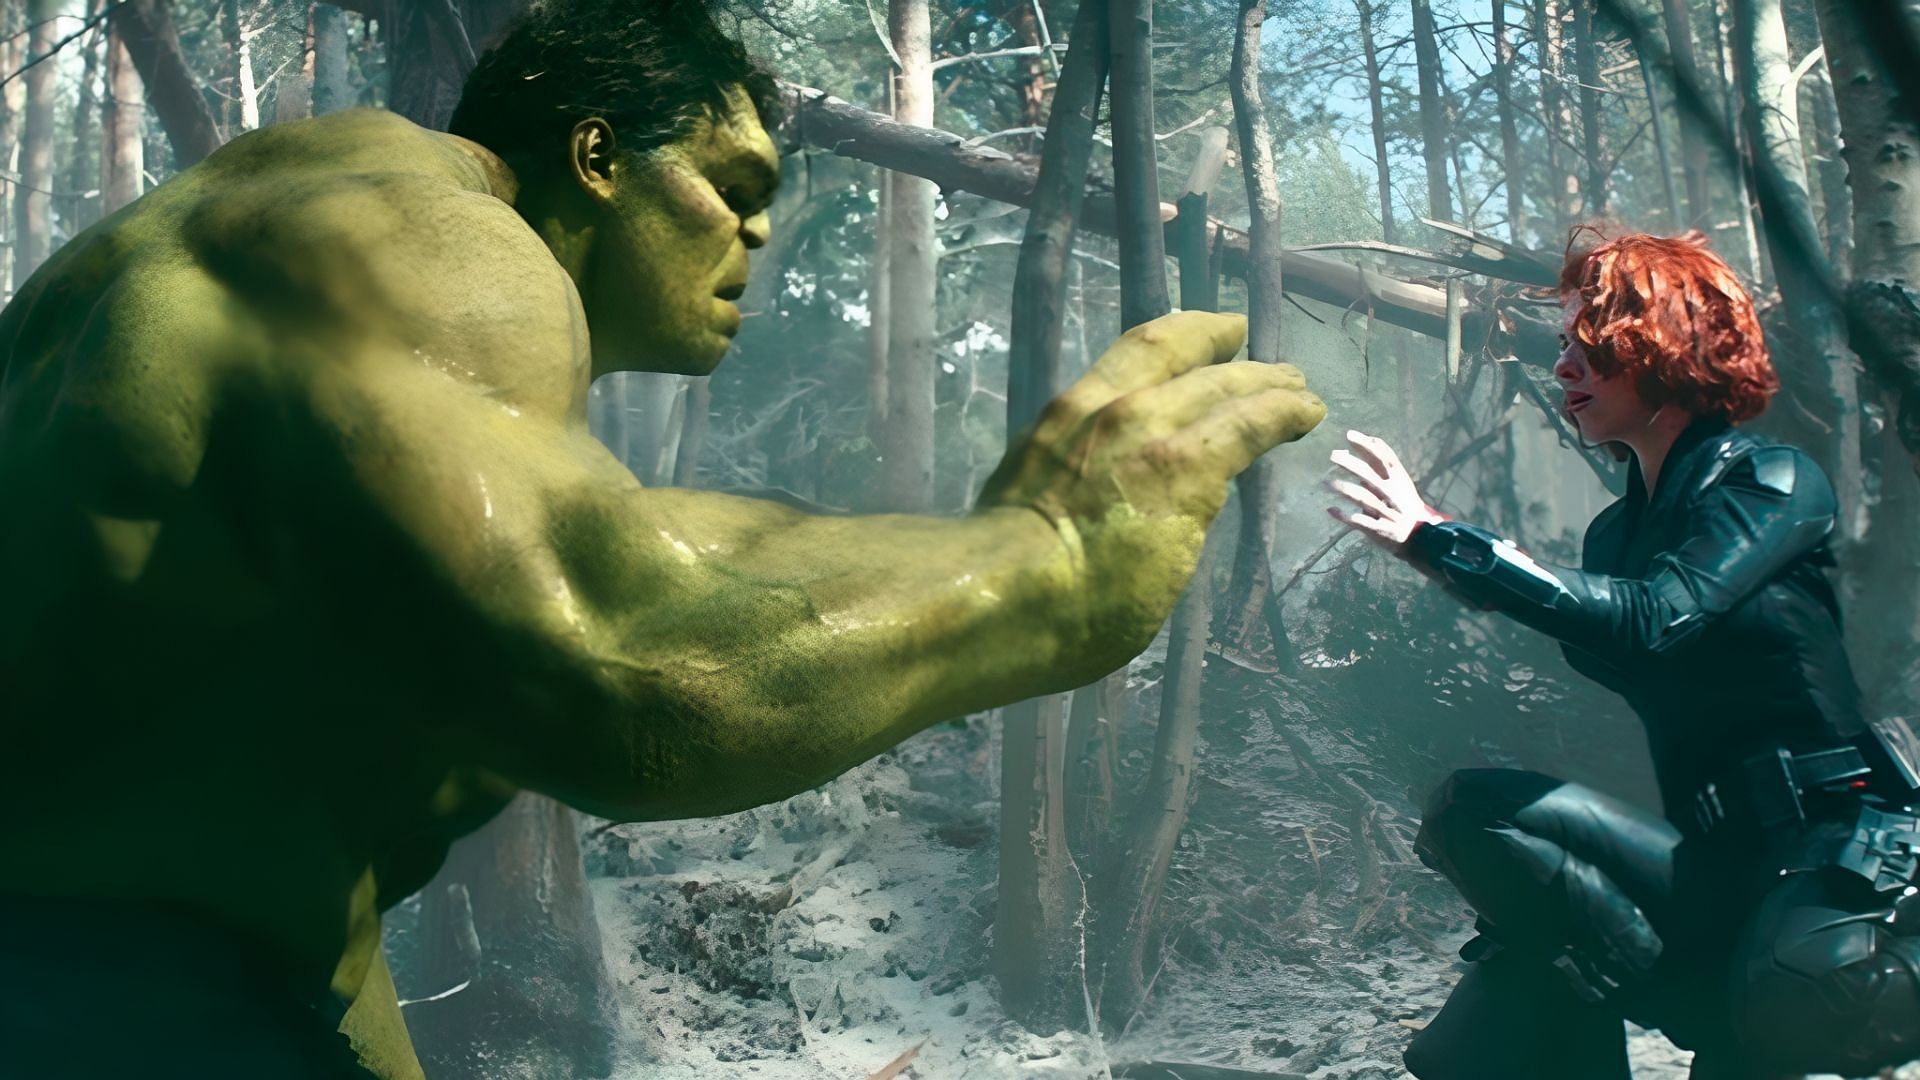 Hulk expressed his distrust of Black Widow, citing his methods as a form of protection. (Image via Marvel)